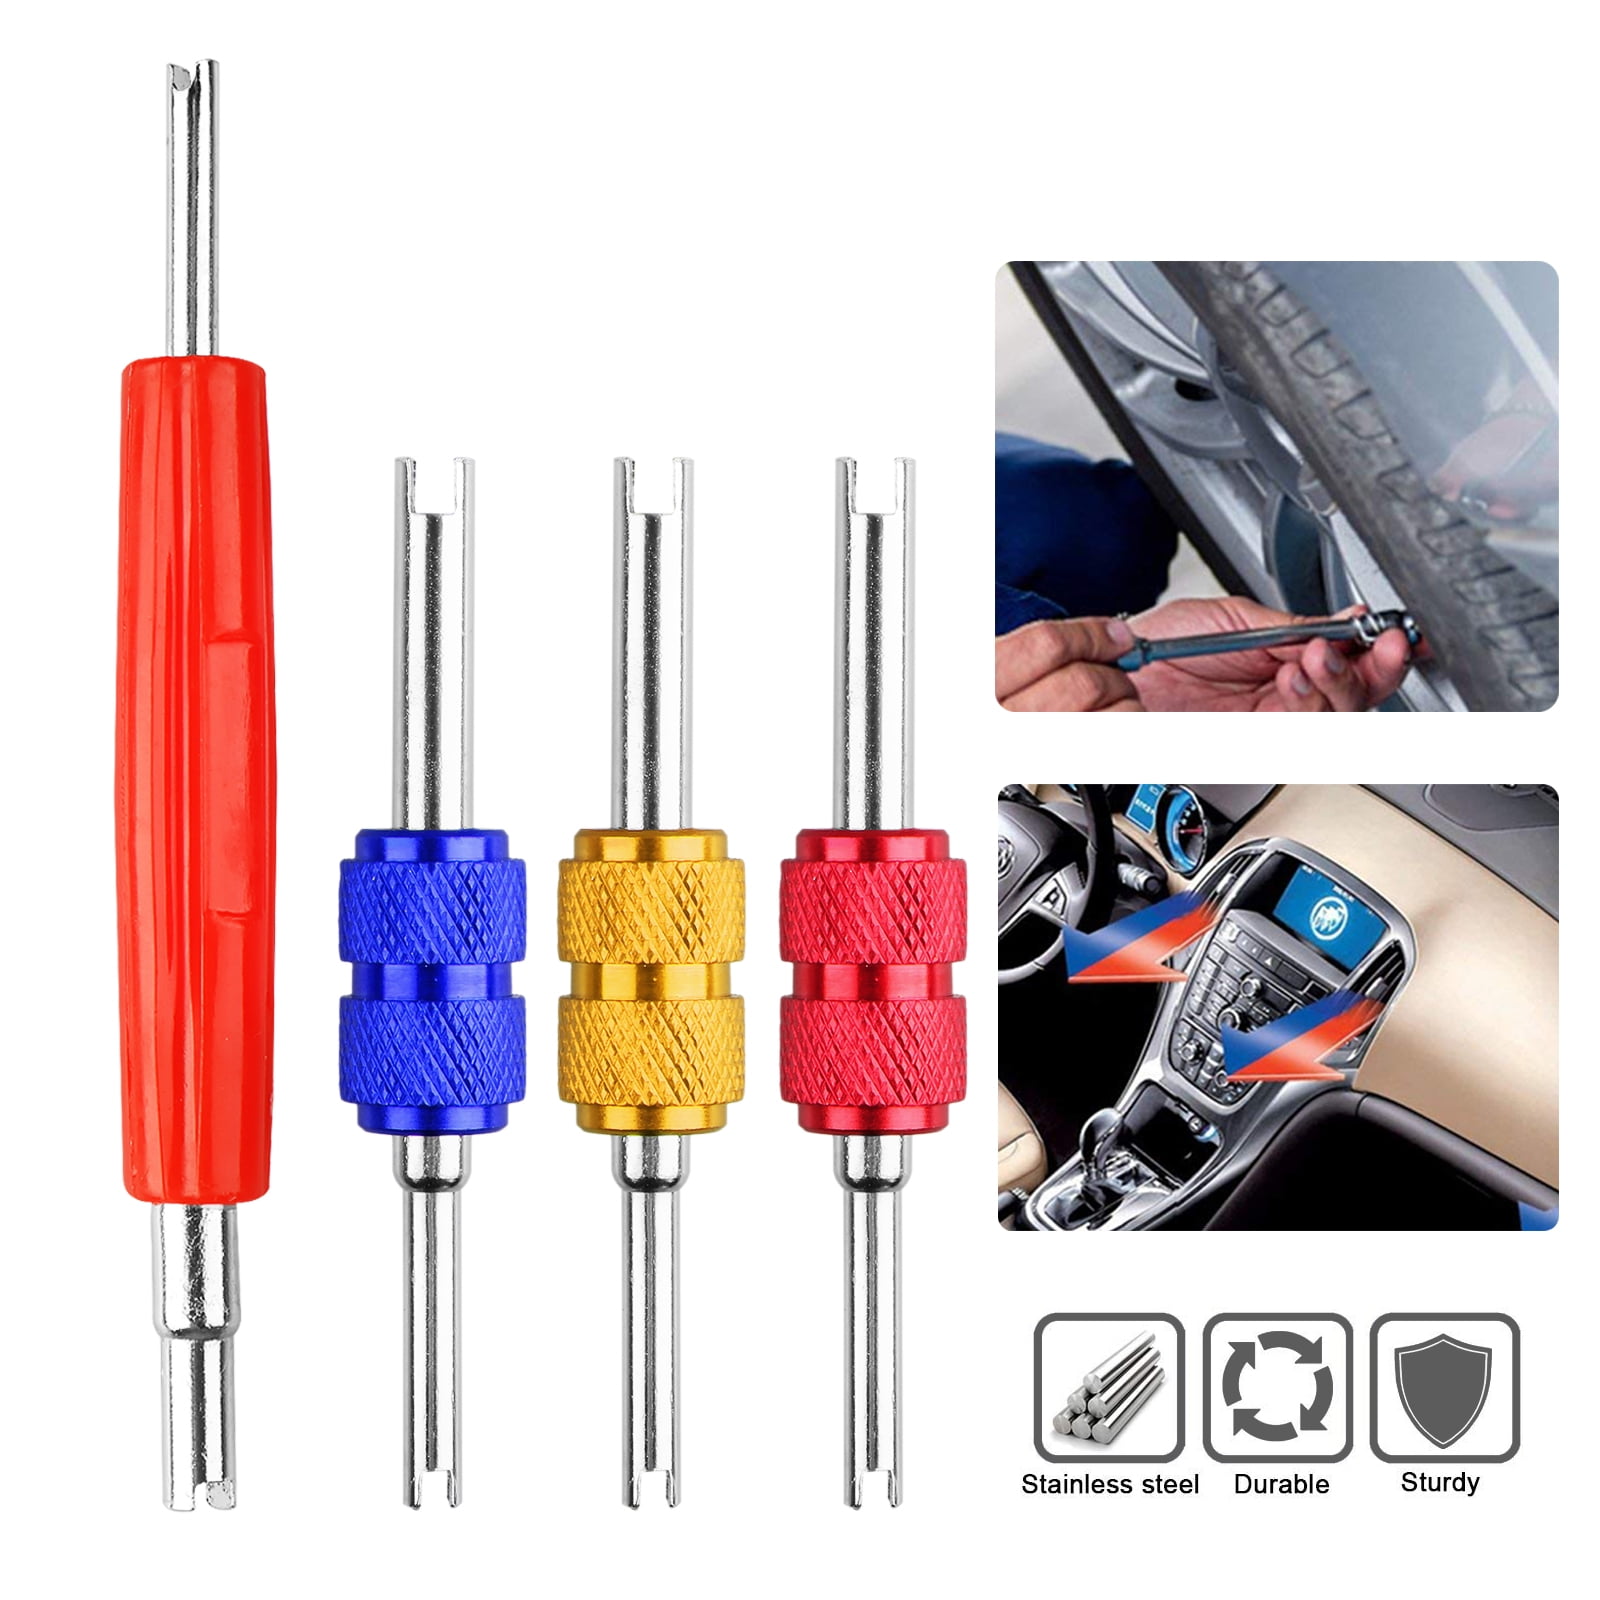 Tool for Automotive Installer Side 2 2PCS AC Schrader Valve Core Remover Truck 